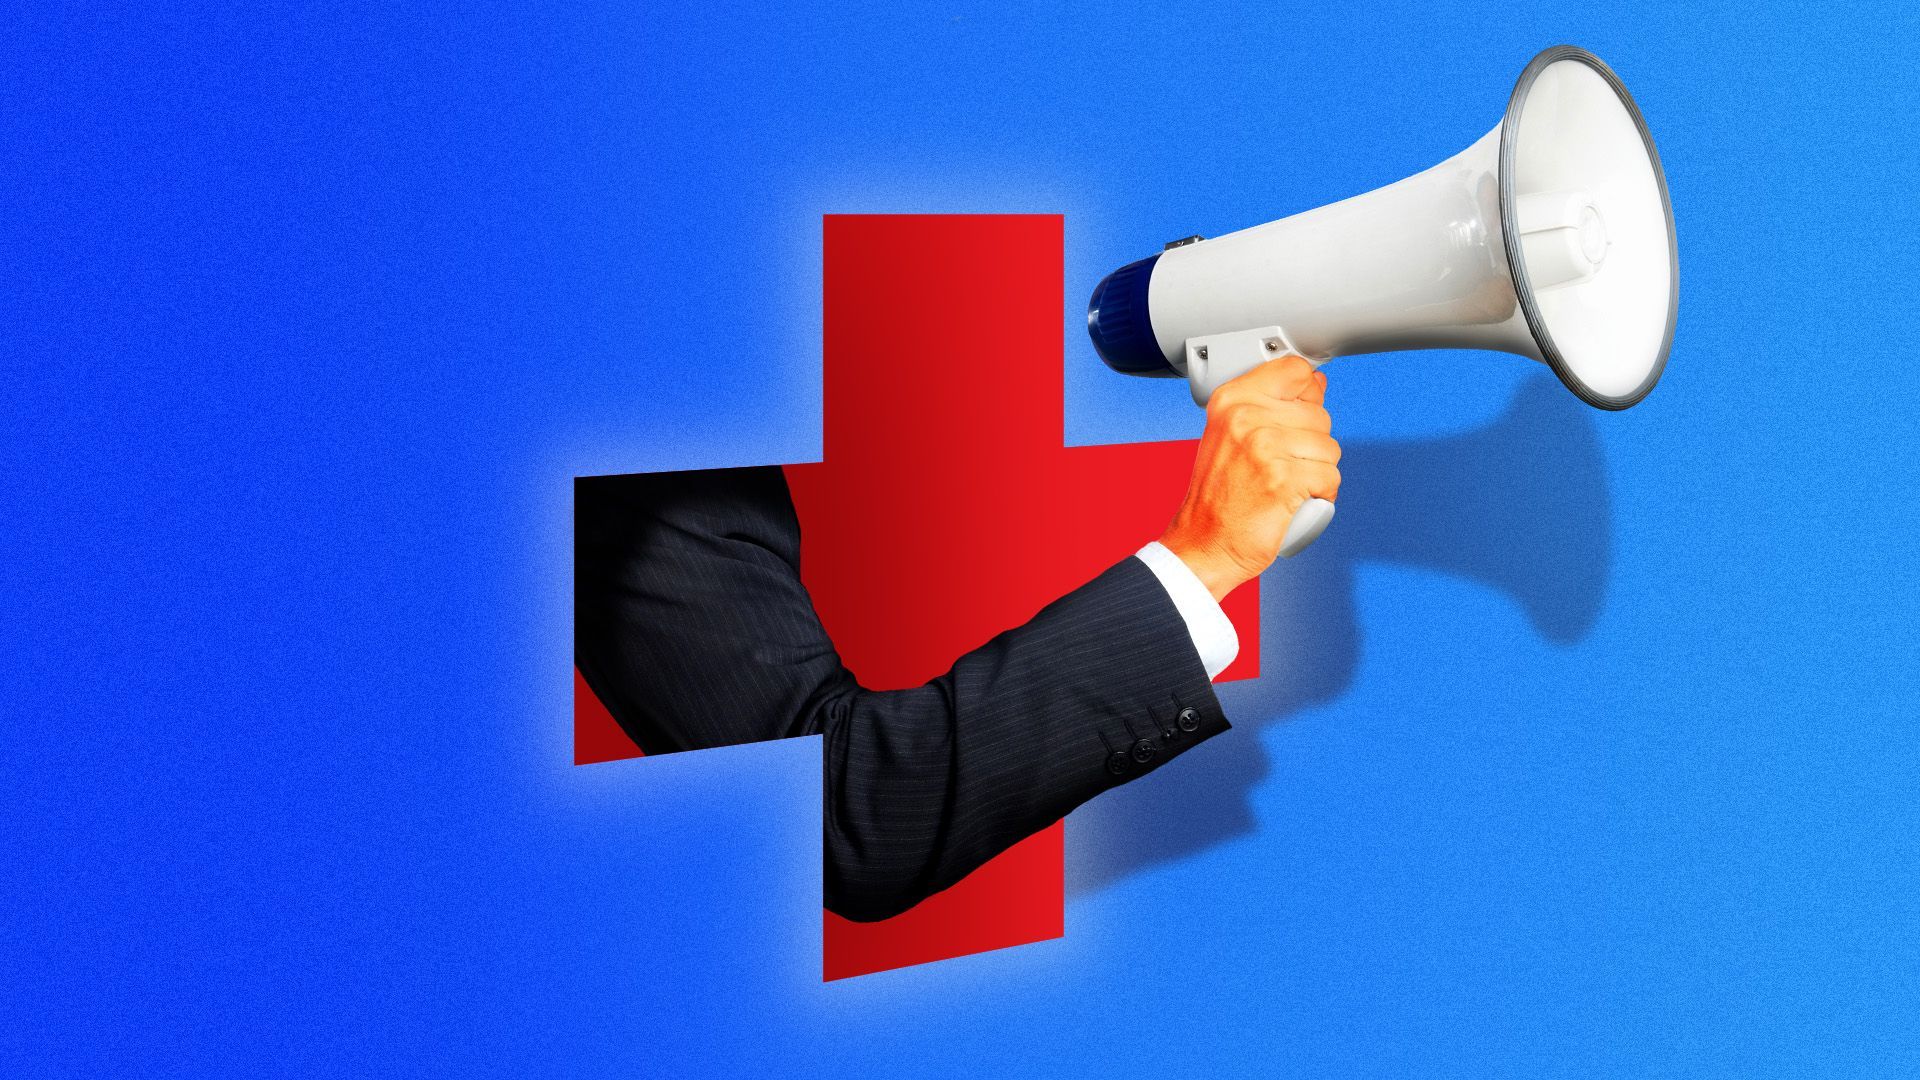 Illustration of an arm with a megaphone appearing out of a hole in the shape of a red cross